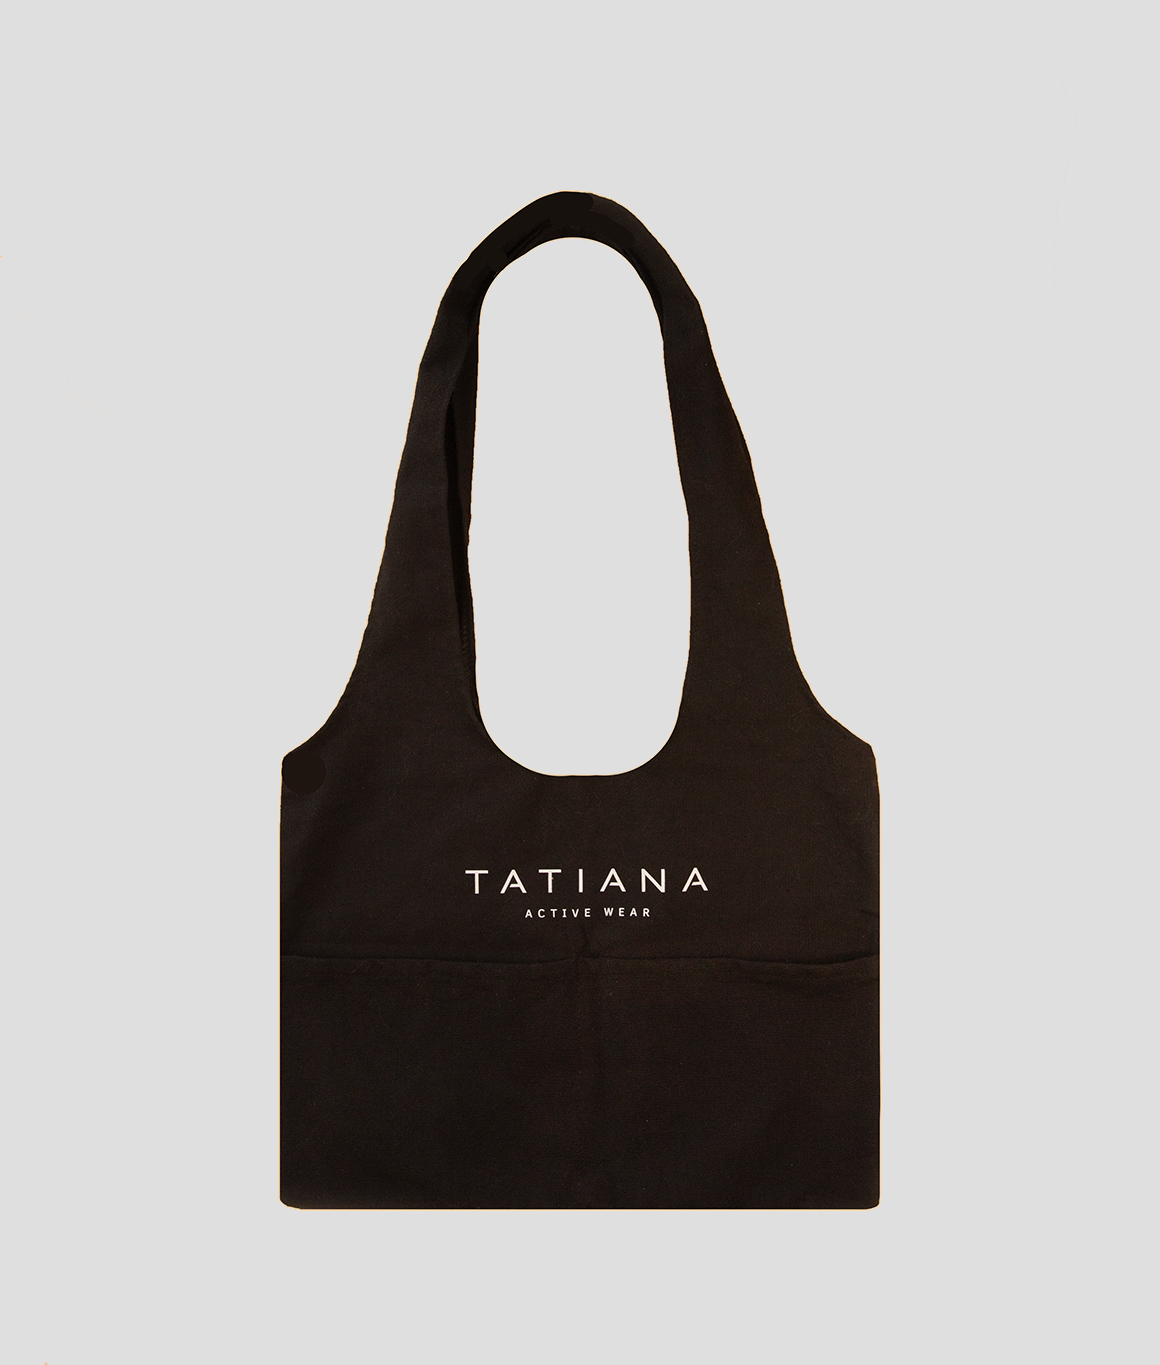 Tatiana Active - 100% Recycled Cotton Tote Bag - Back (Final Cropped)